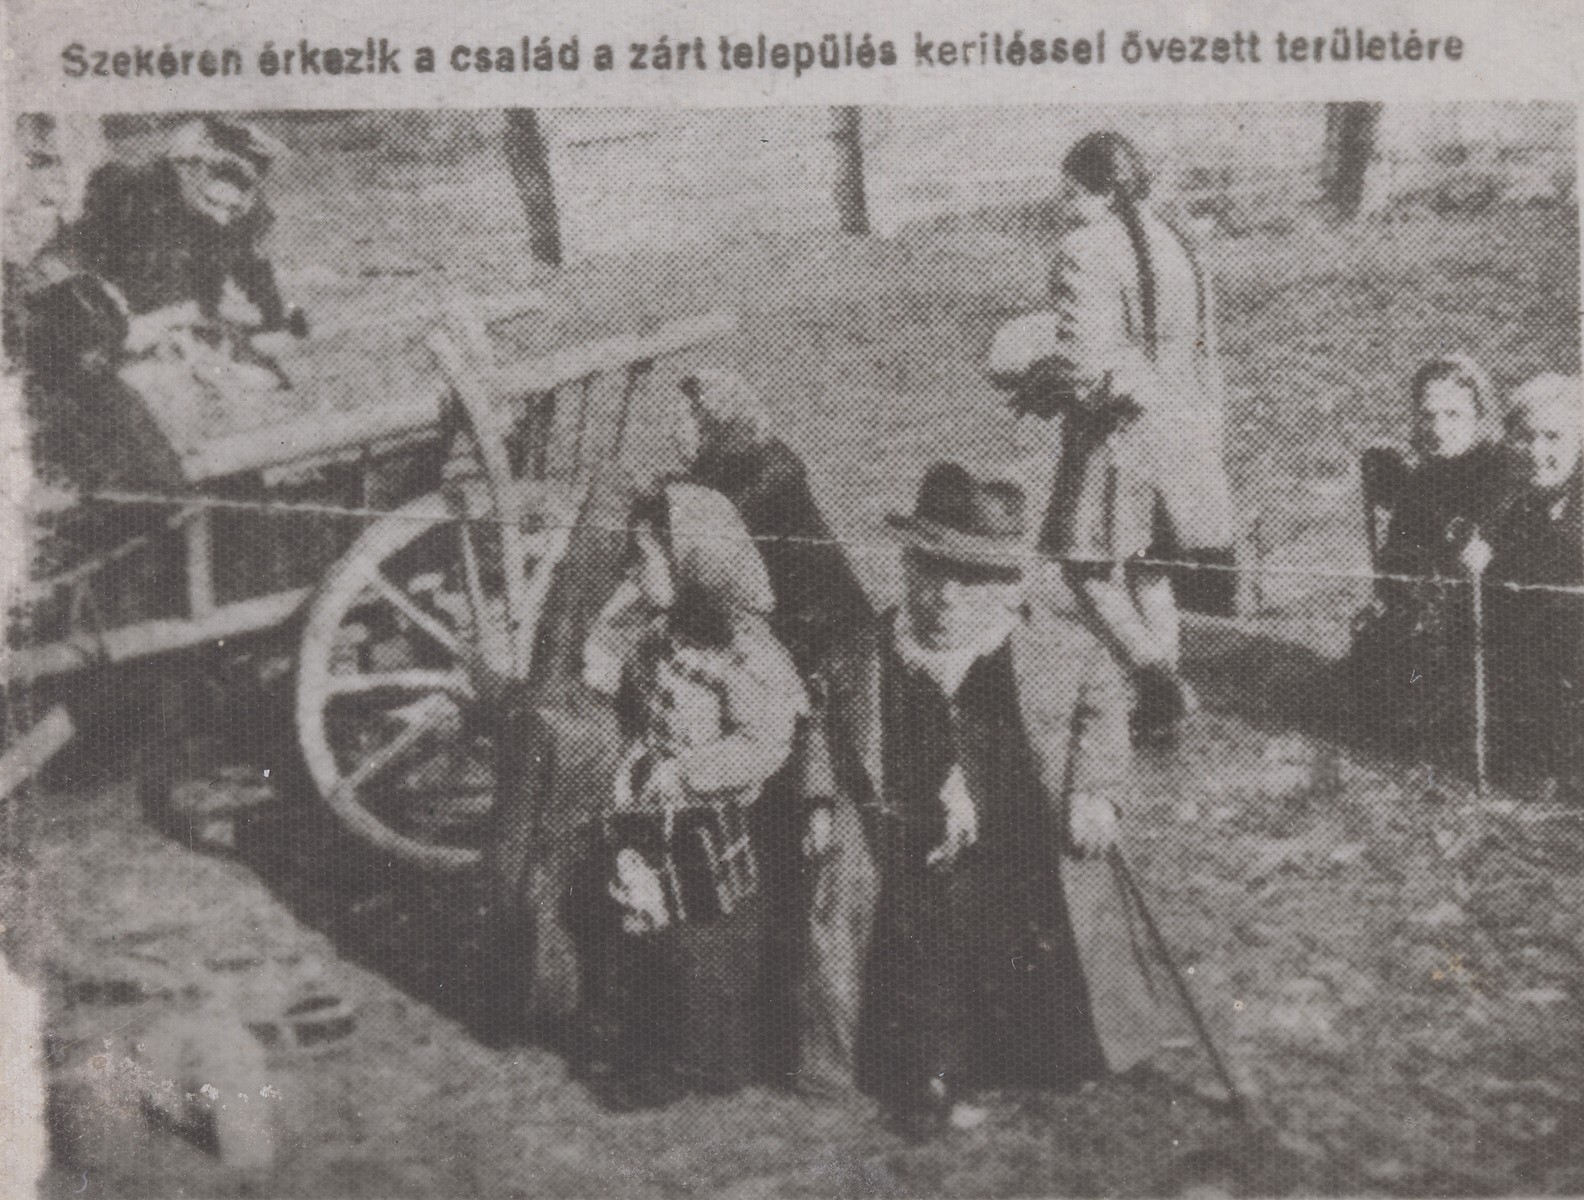 Members of the Ovici family arrive by farm wagon to the ghetto of Dragomiresti prior to their deportation to Auschwitz.

The original newspaper caption reads: "The family arrives to the closed residential area which is surrounded by a fence.  They arrived on this horse-drawn wagon."